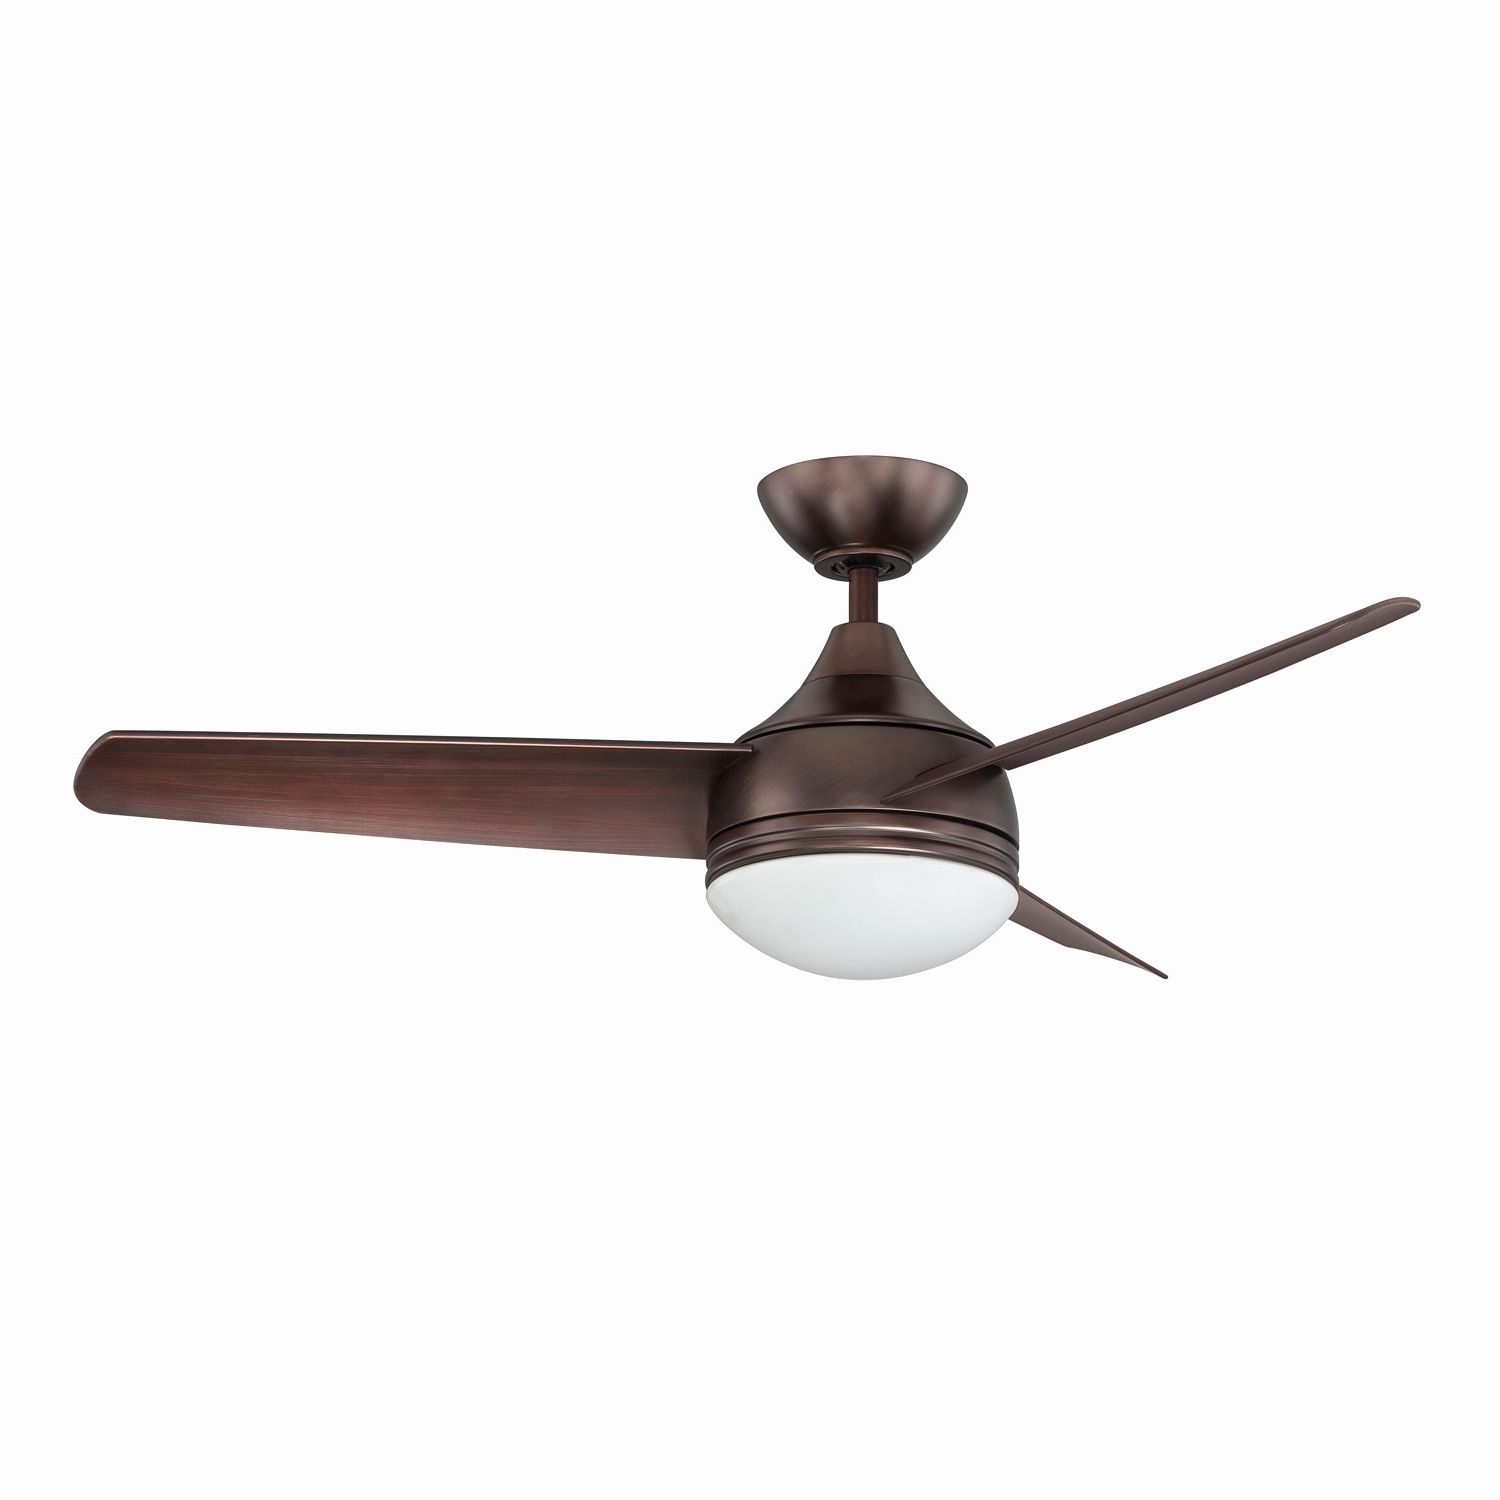 Fashionable Outdoor Ceiling Fans With Lights And Remote Control With Regard To Outdoor Ceiling Fans With Remote Control – Photos House Interior And (View 14 of 20)